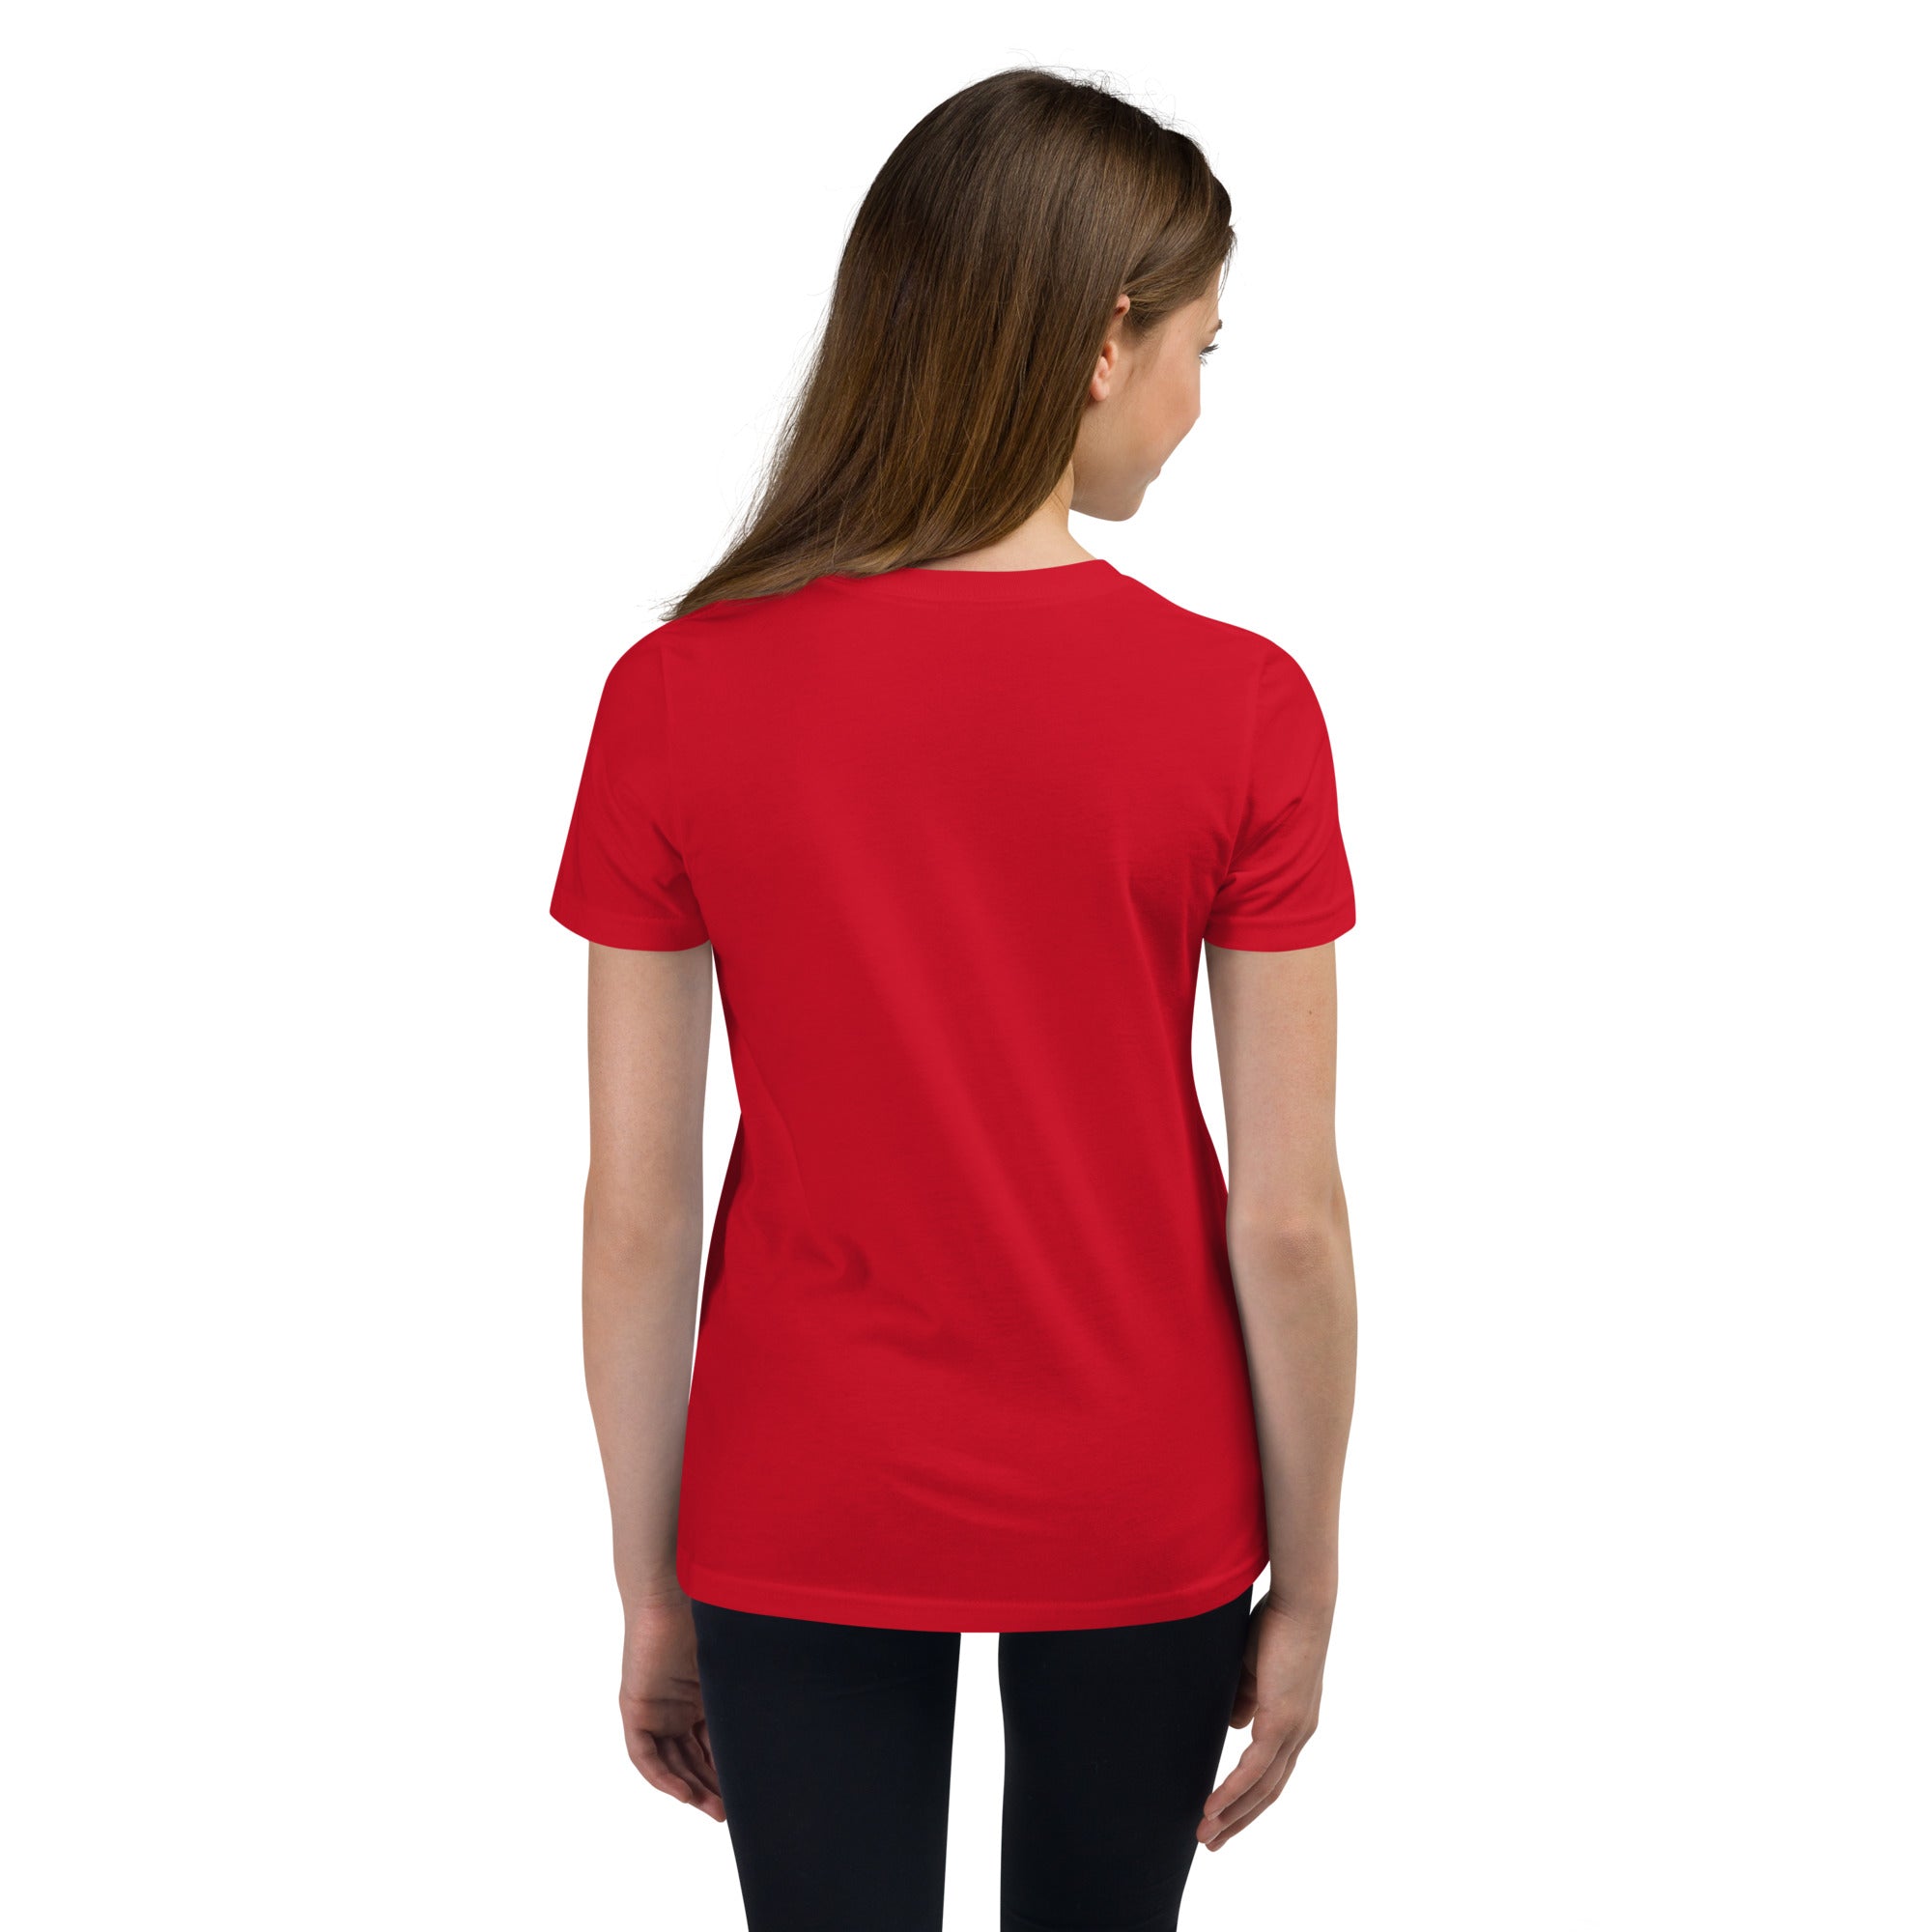 SiouxFalls SW - Red - W Youth Short Sleeve T-Shirt